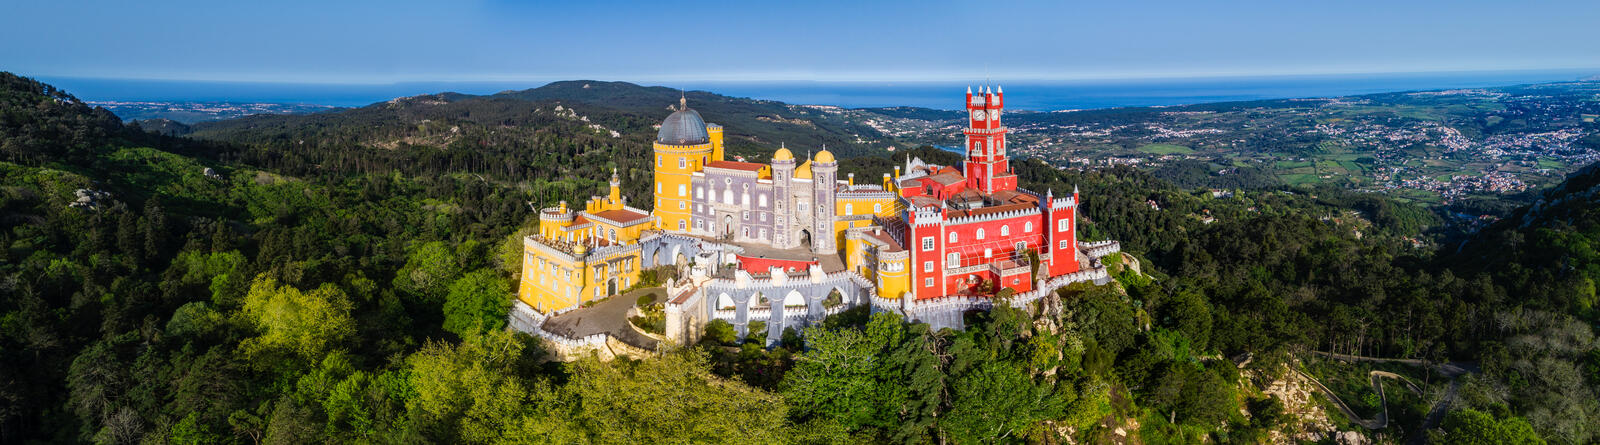 Wallpapers Pano Pena Palace Pena Palace - Sintra Portugal on the desktop